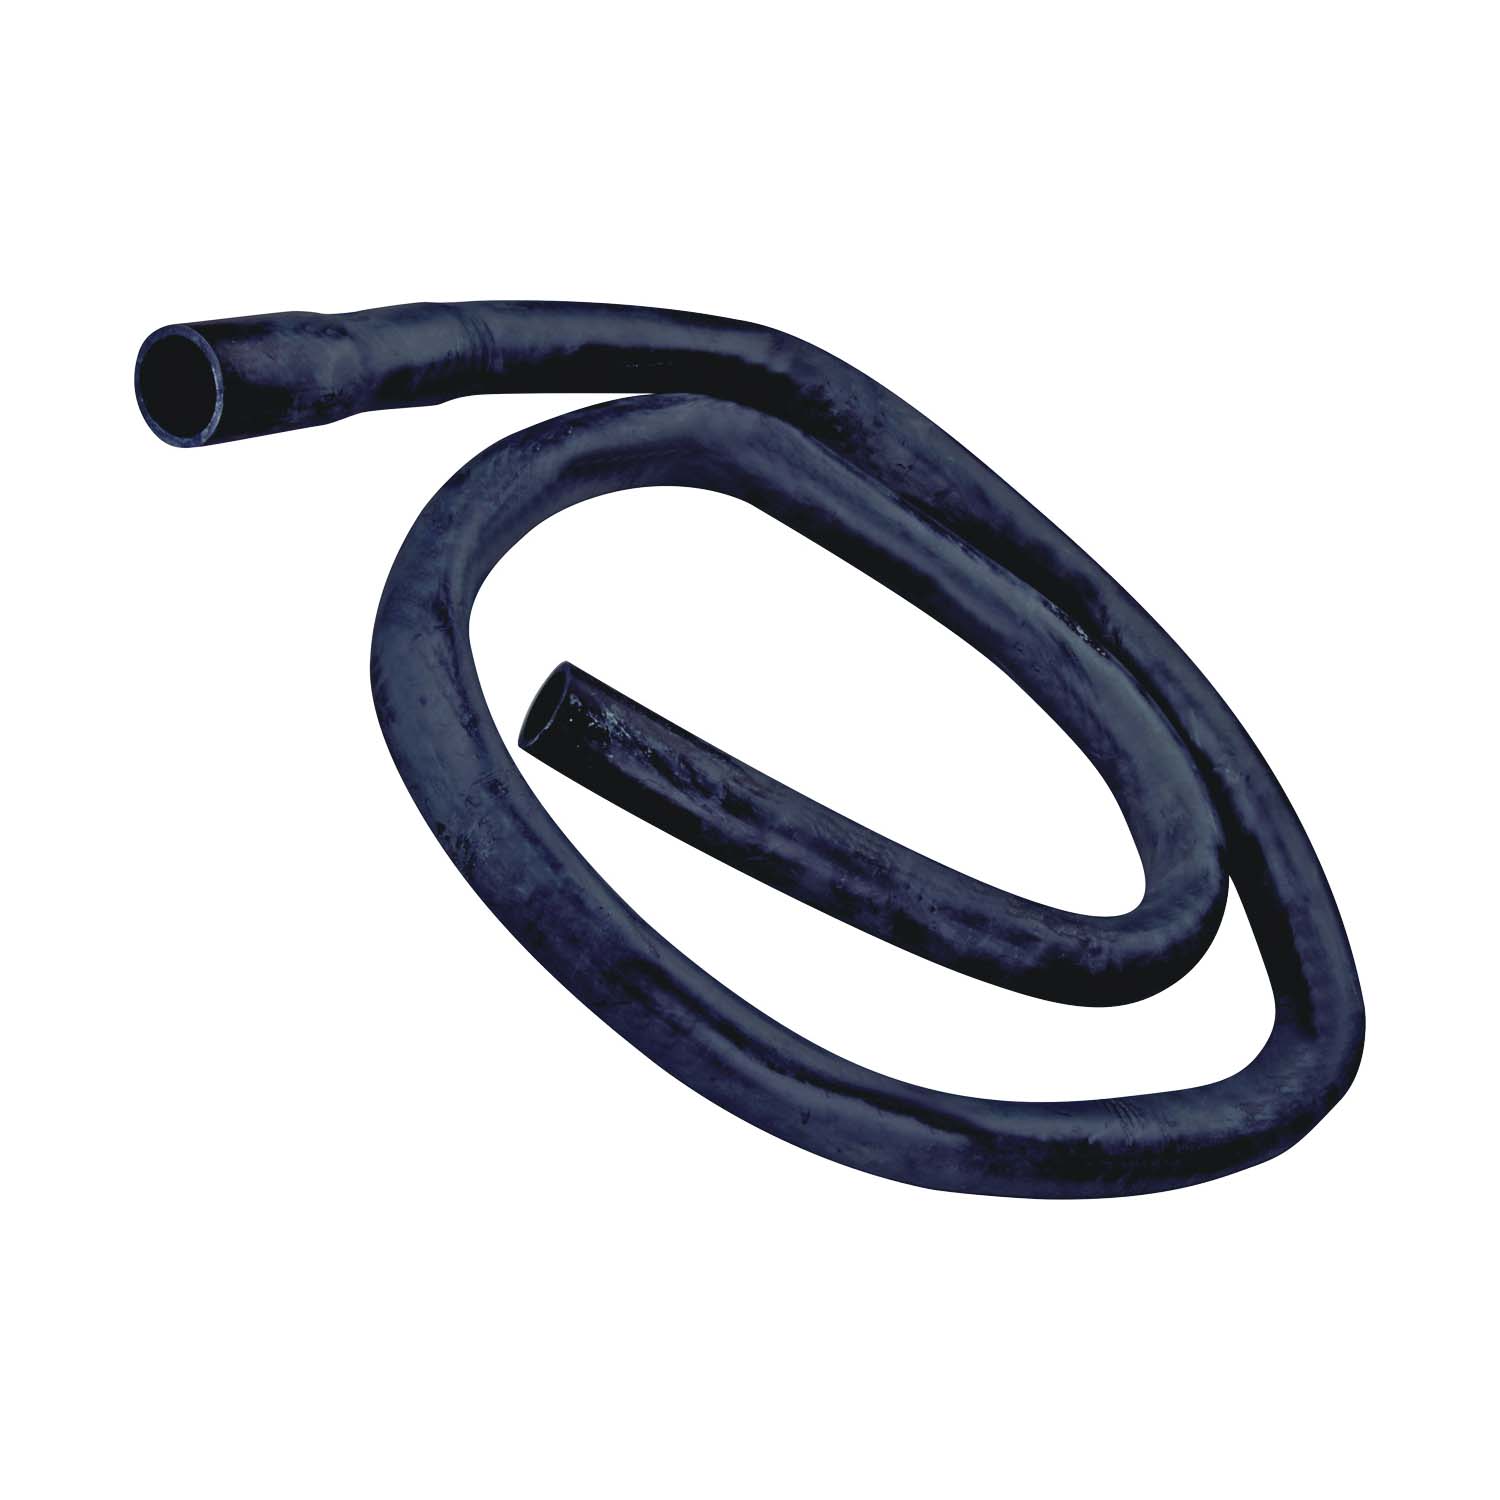 PMB-449 Washing Machine Discharge Hose, 3/4 in ID, 5 ft L